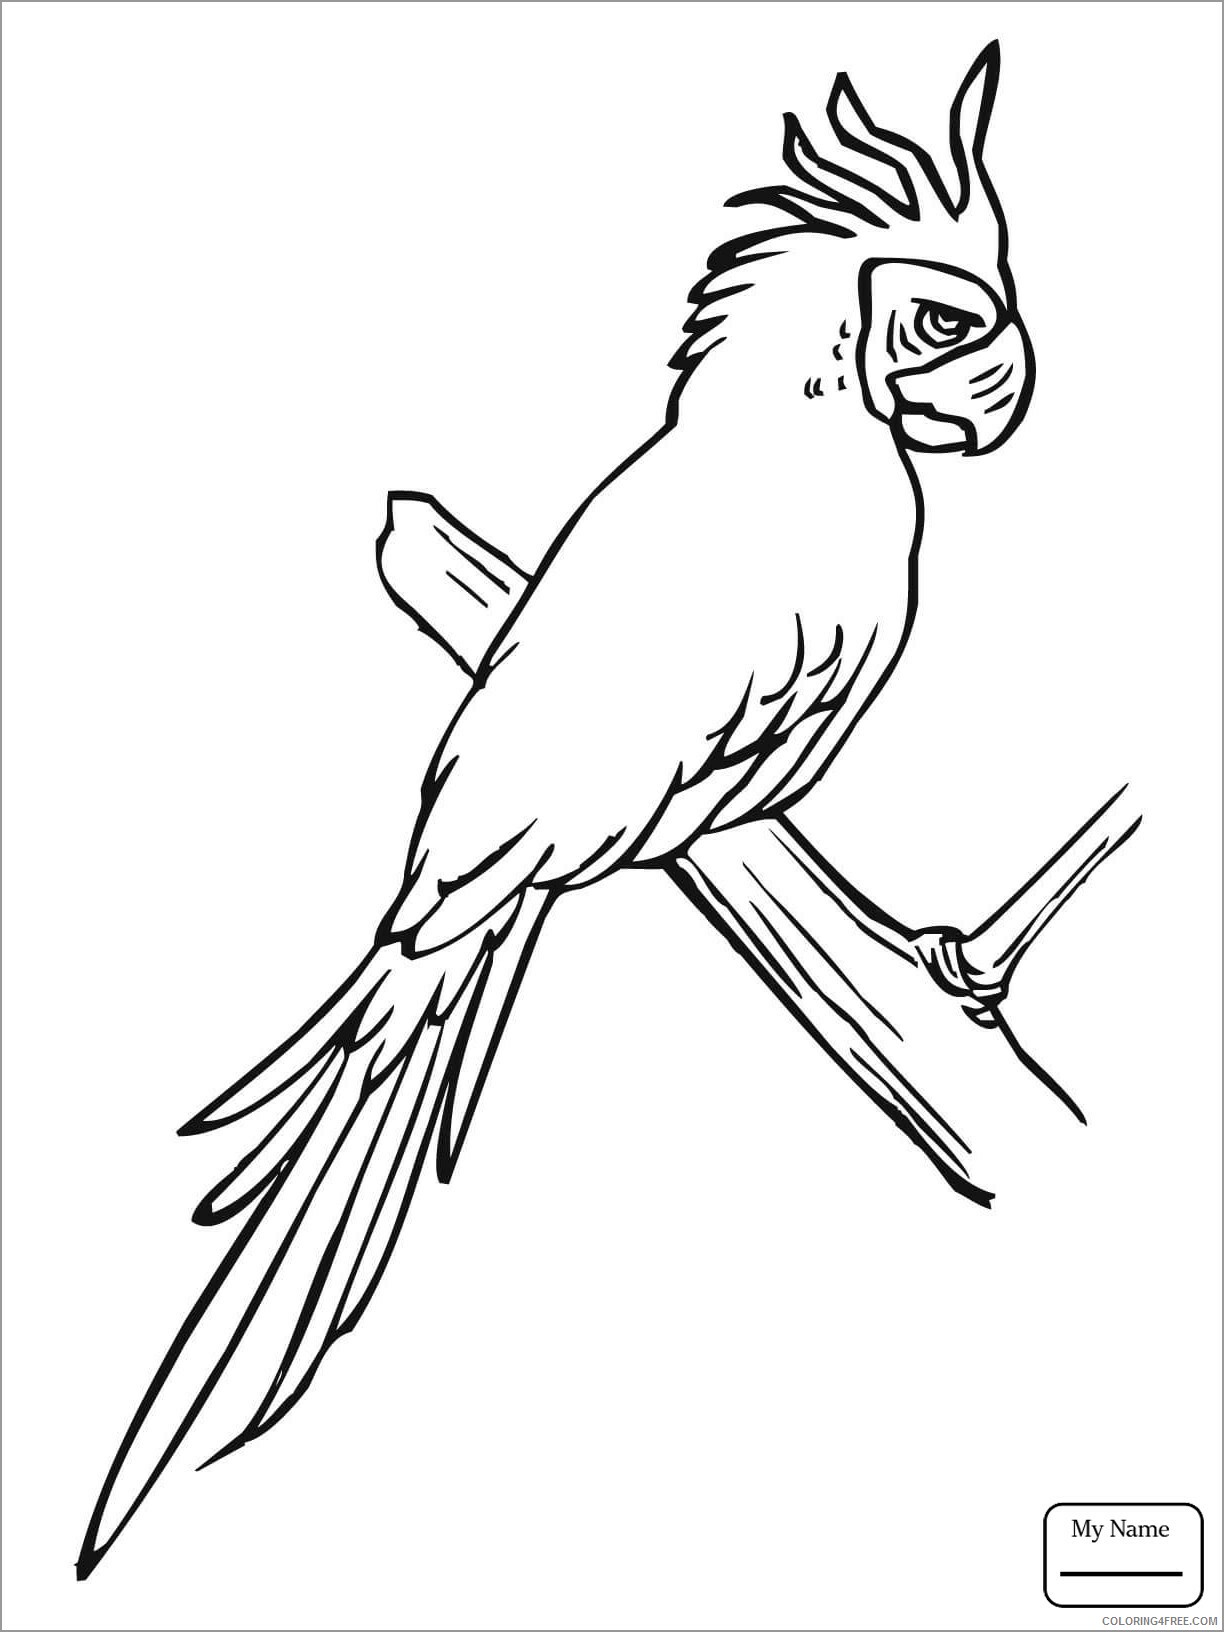 Macaw Coloring Pages Animal Printable Sheets blue macaw 2021 3253 Coloring4free